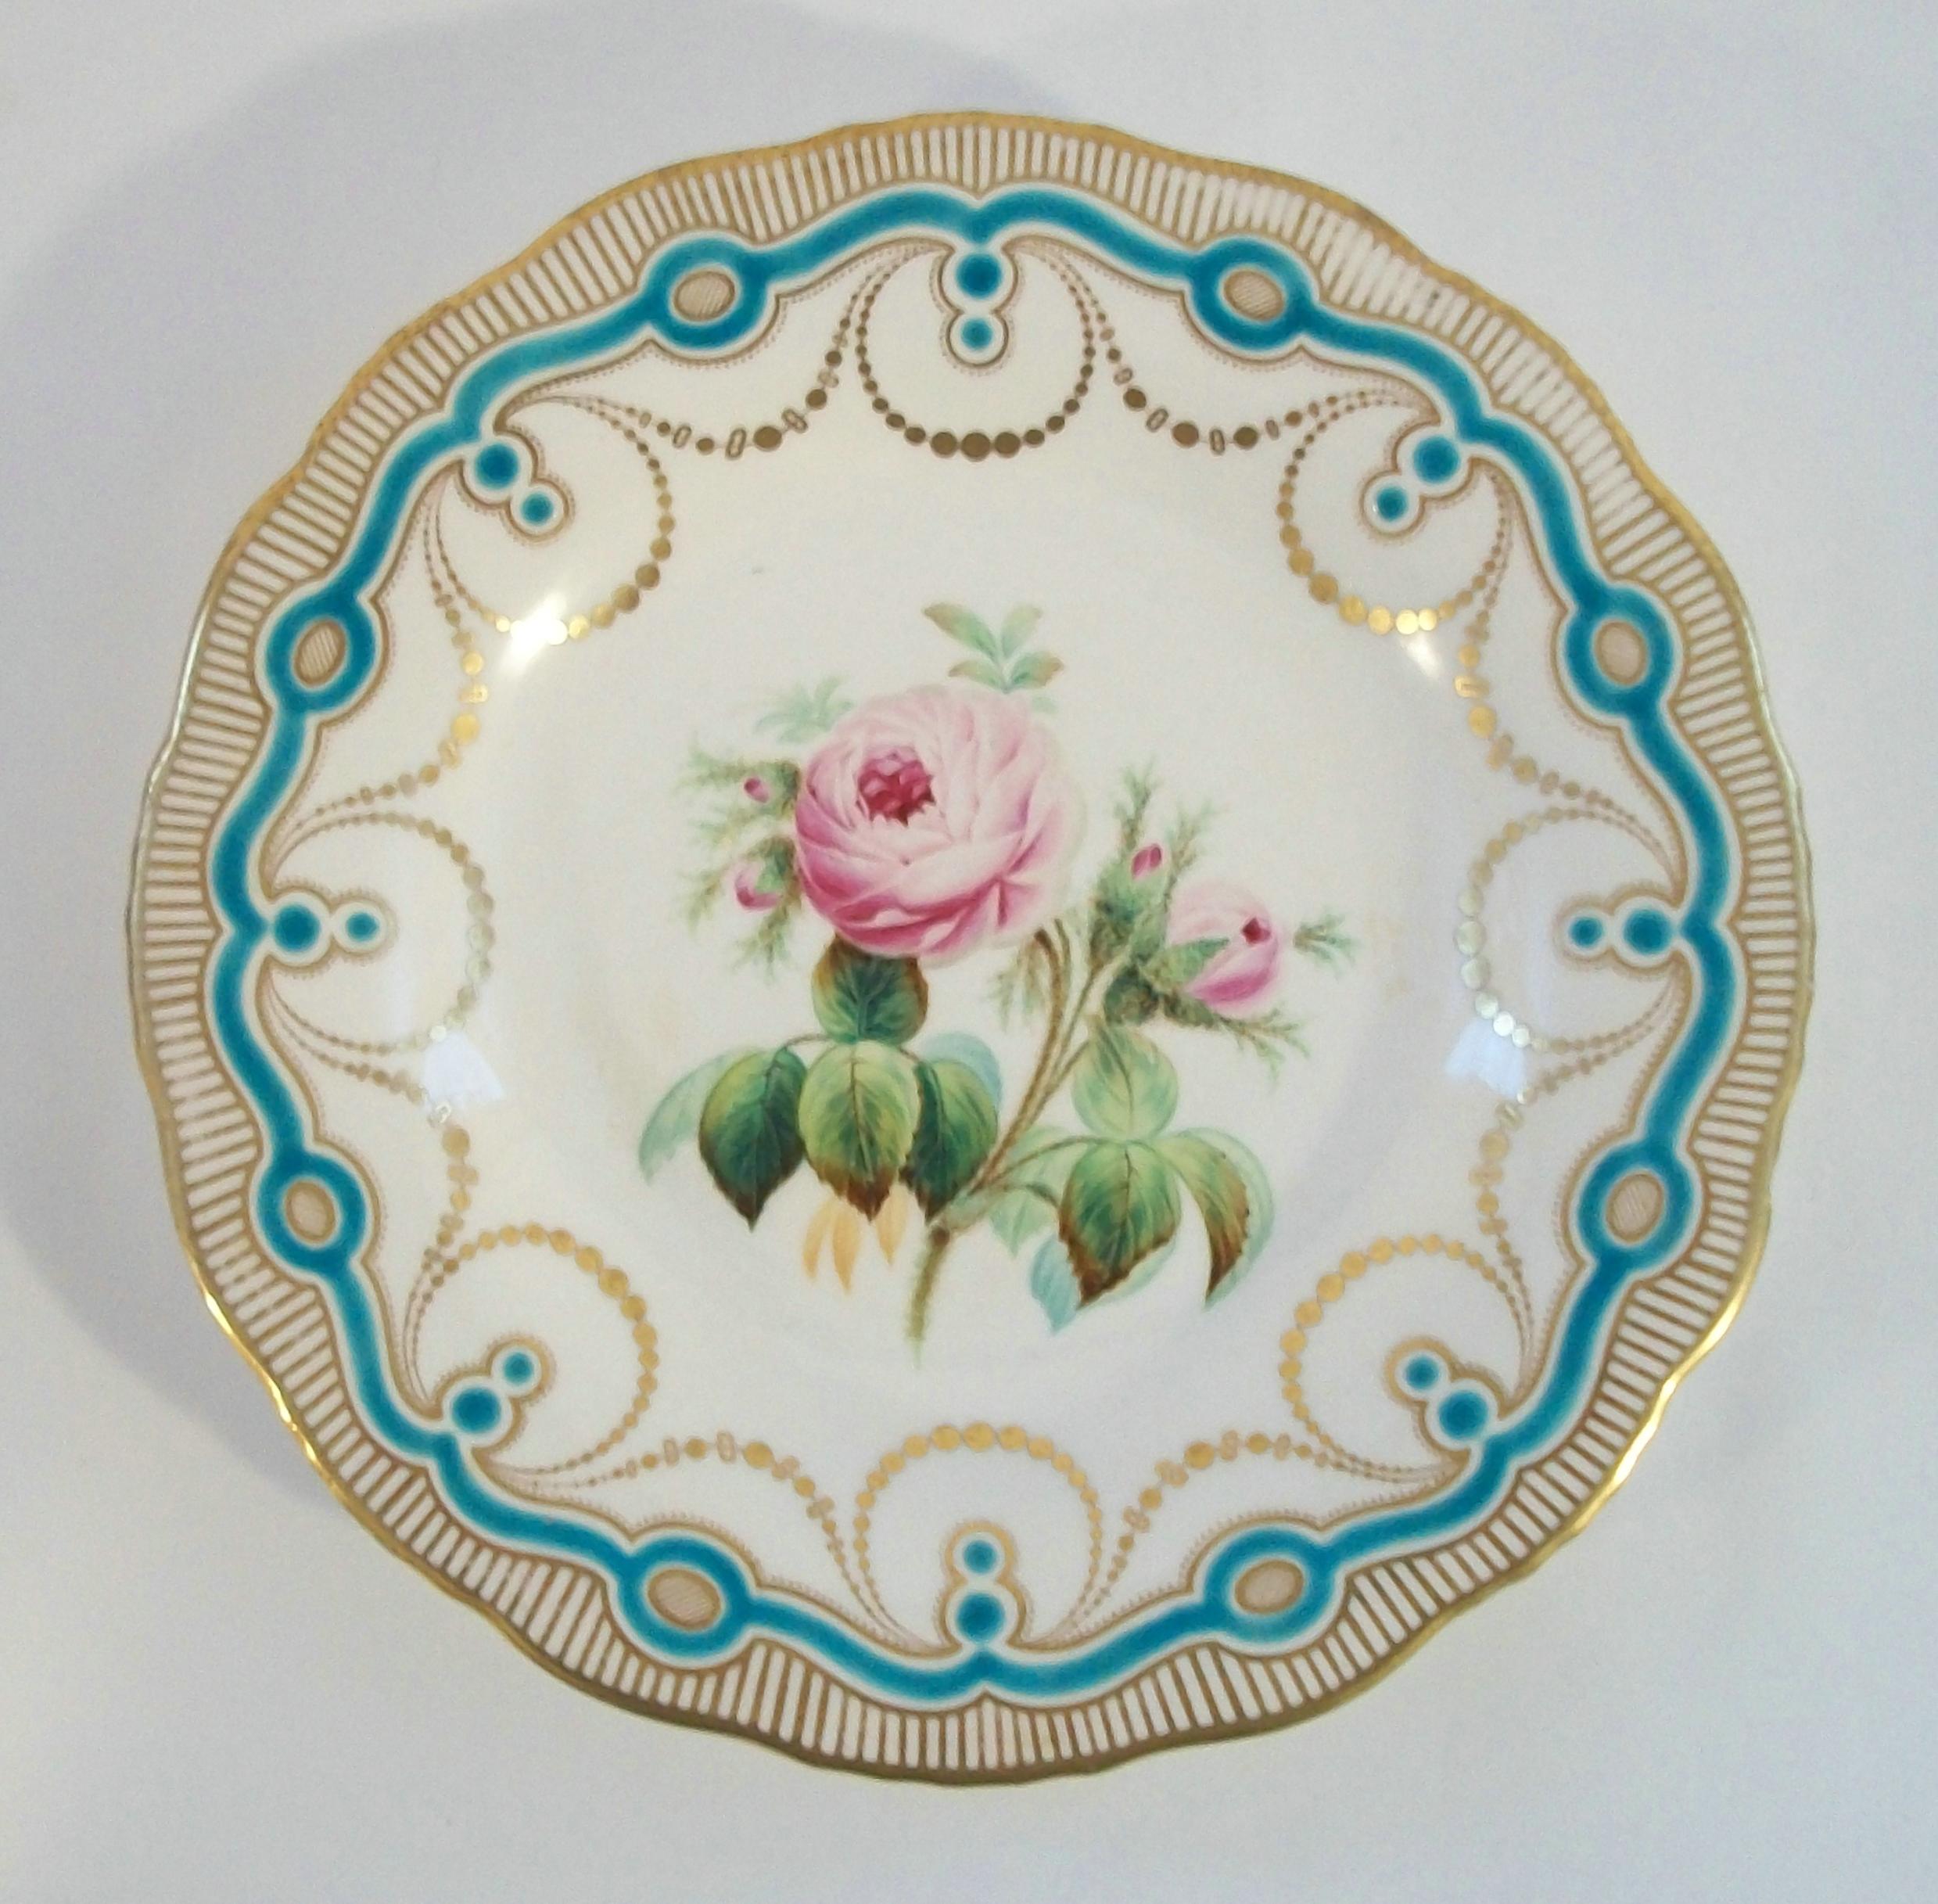 Victorian Antique English Hand Painted Botanical Ceramic Cabinet Plate - U.K. - Circa 1850 For Sale